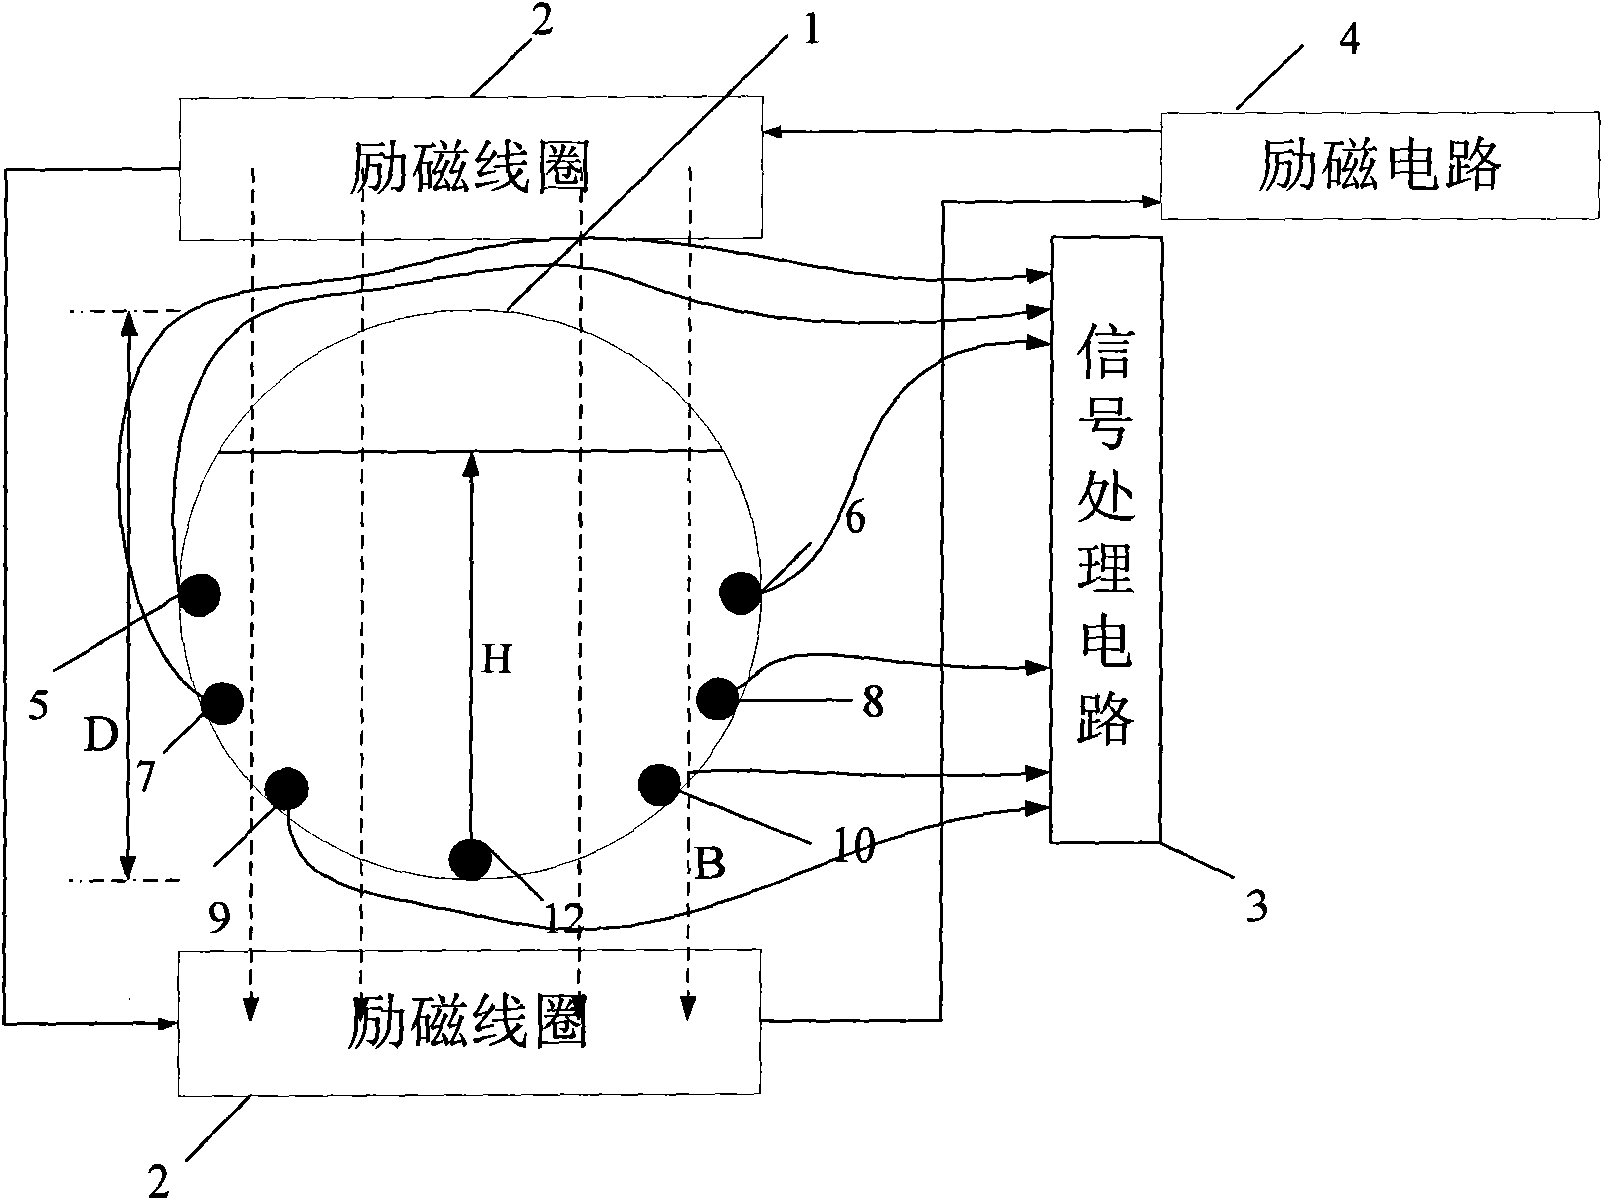 Method for measuring flow of conductive fluid in non-full pipe by using electromagnetic flow meter